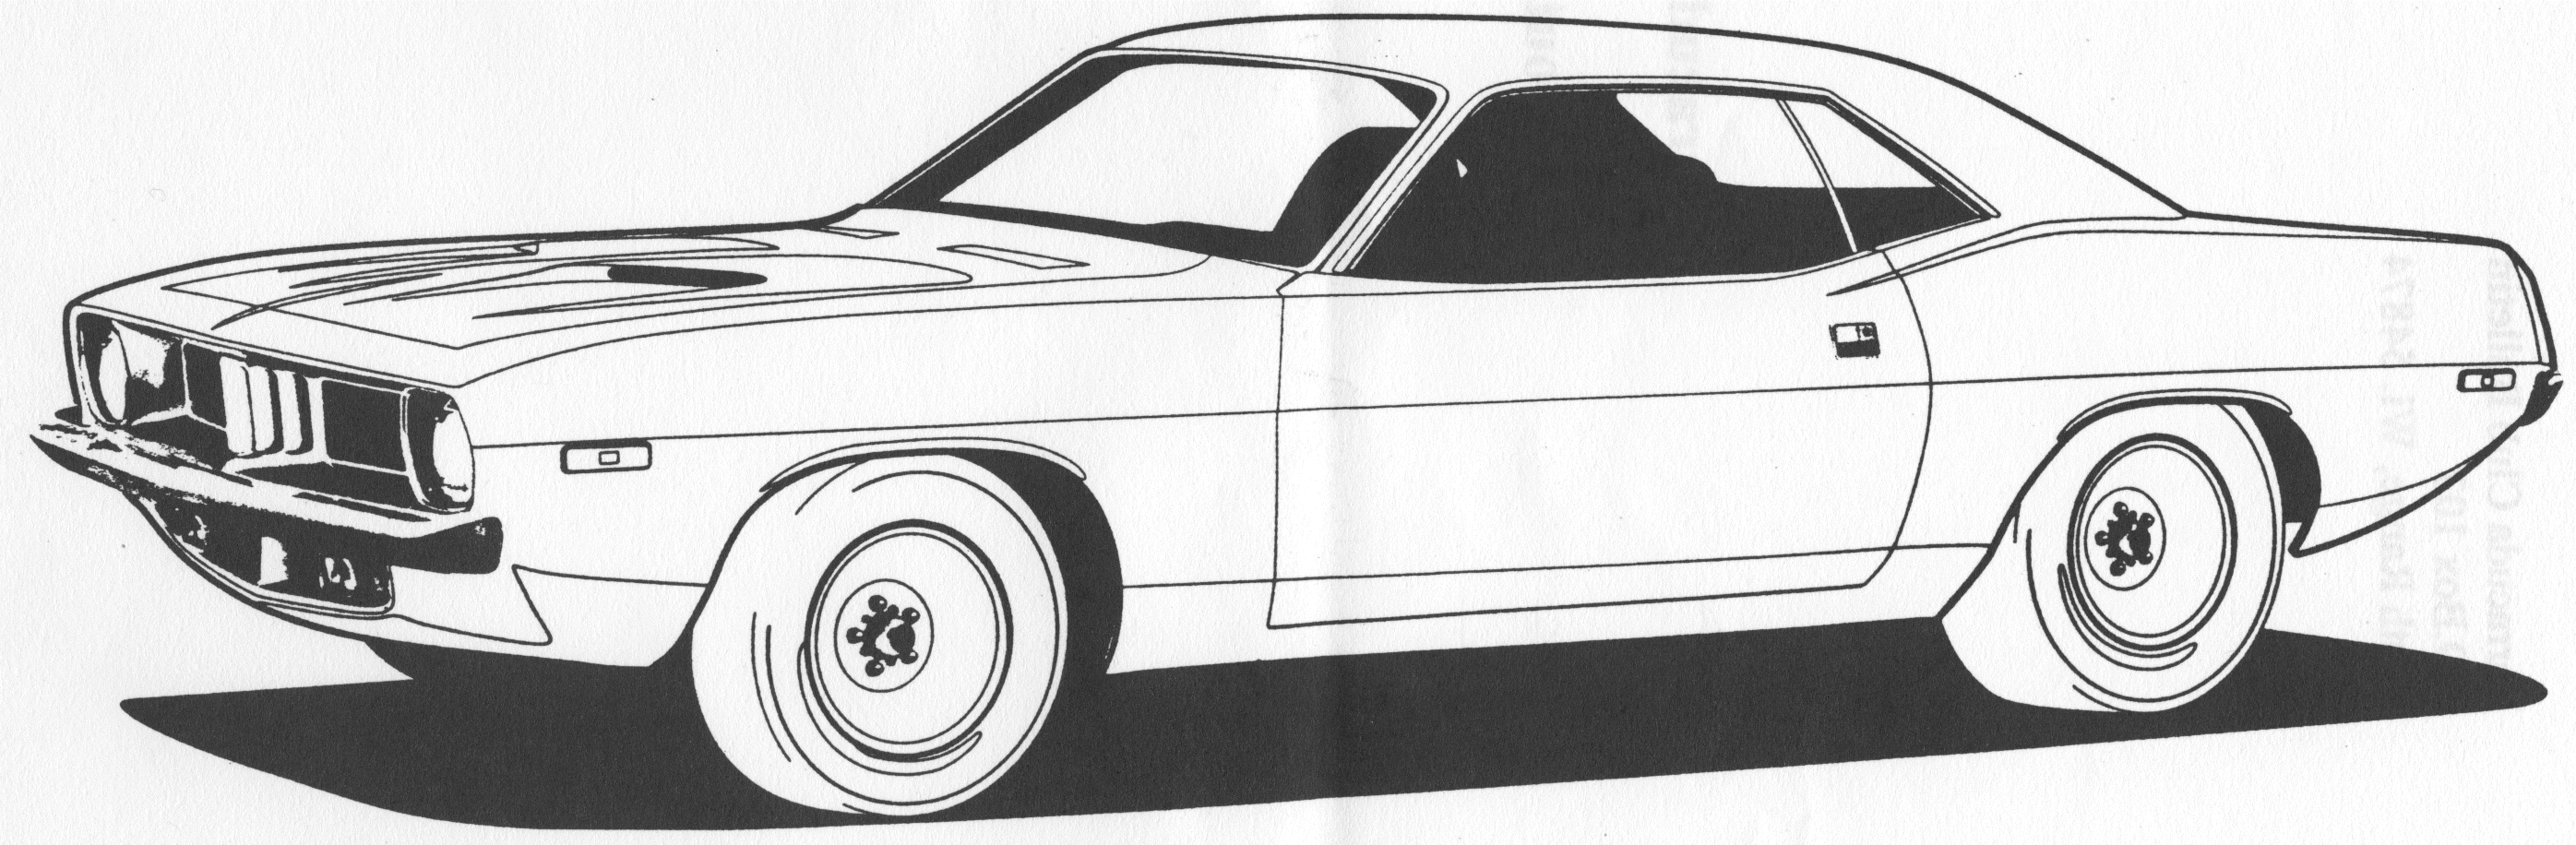 Muscle car coloring pages to download and print for free.